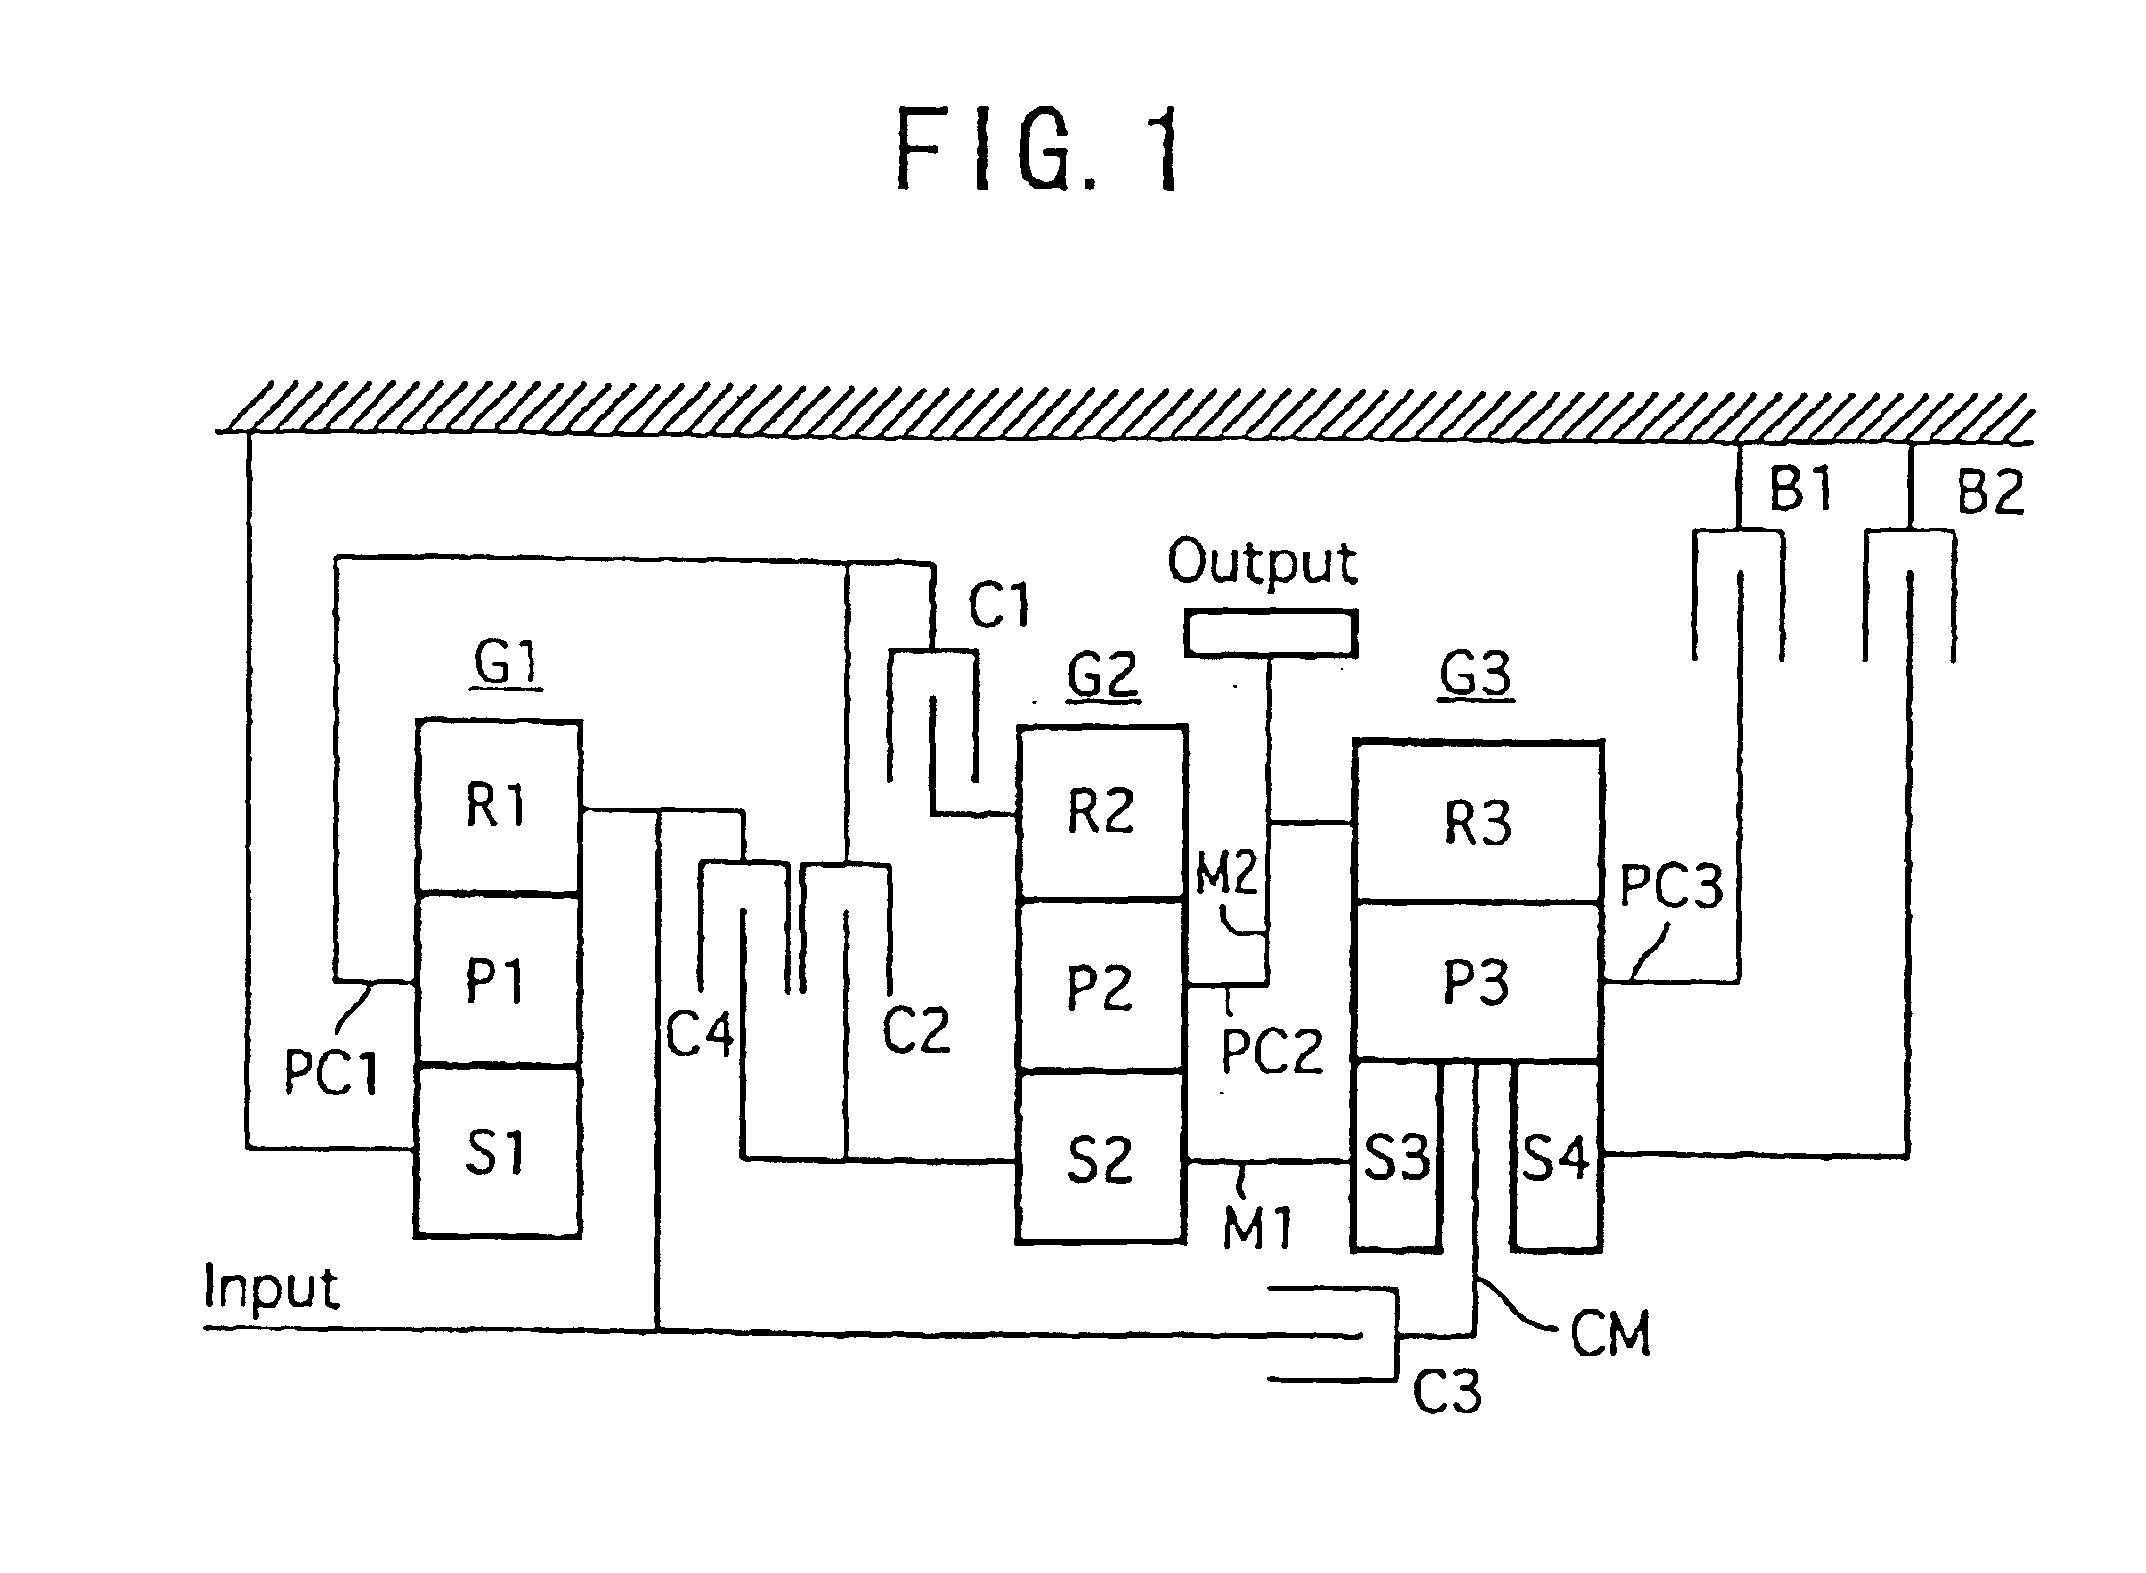 Gear-operated speed change apparatus for automatic transmission